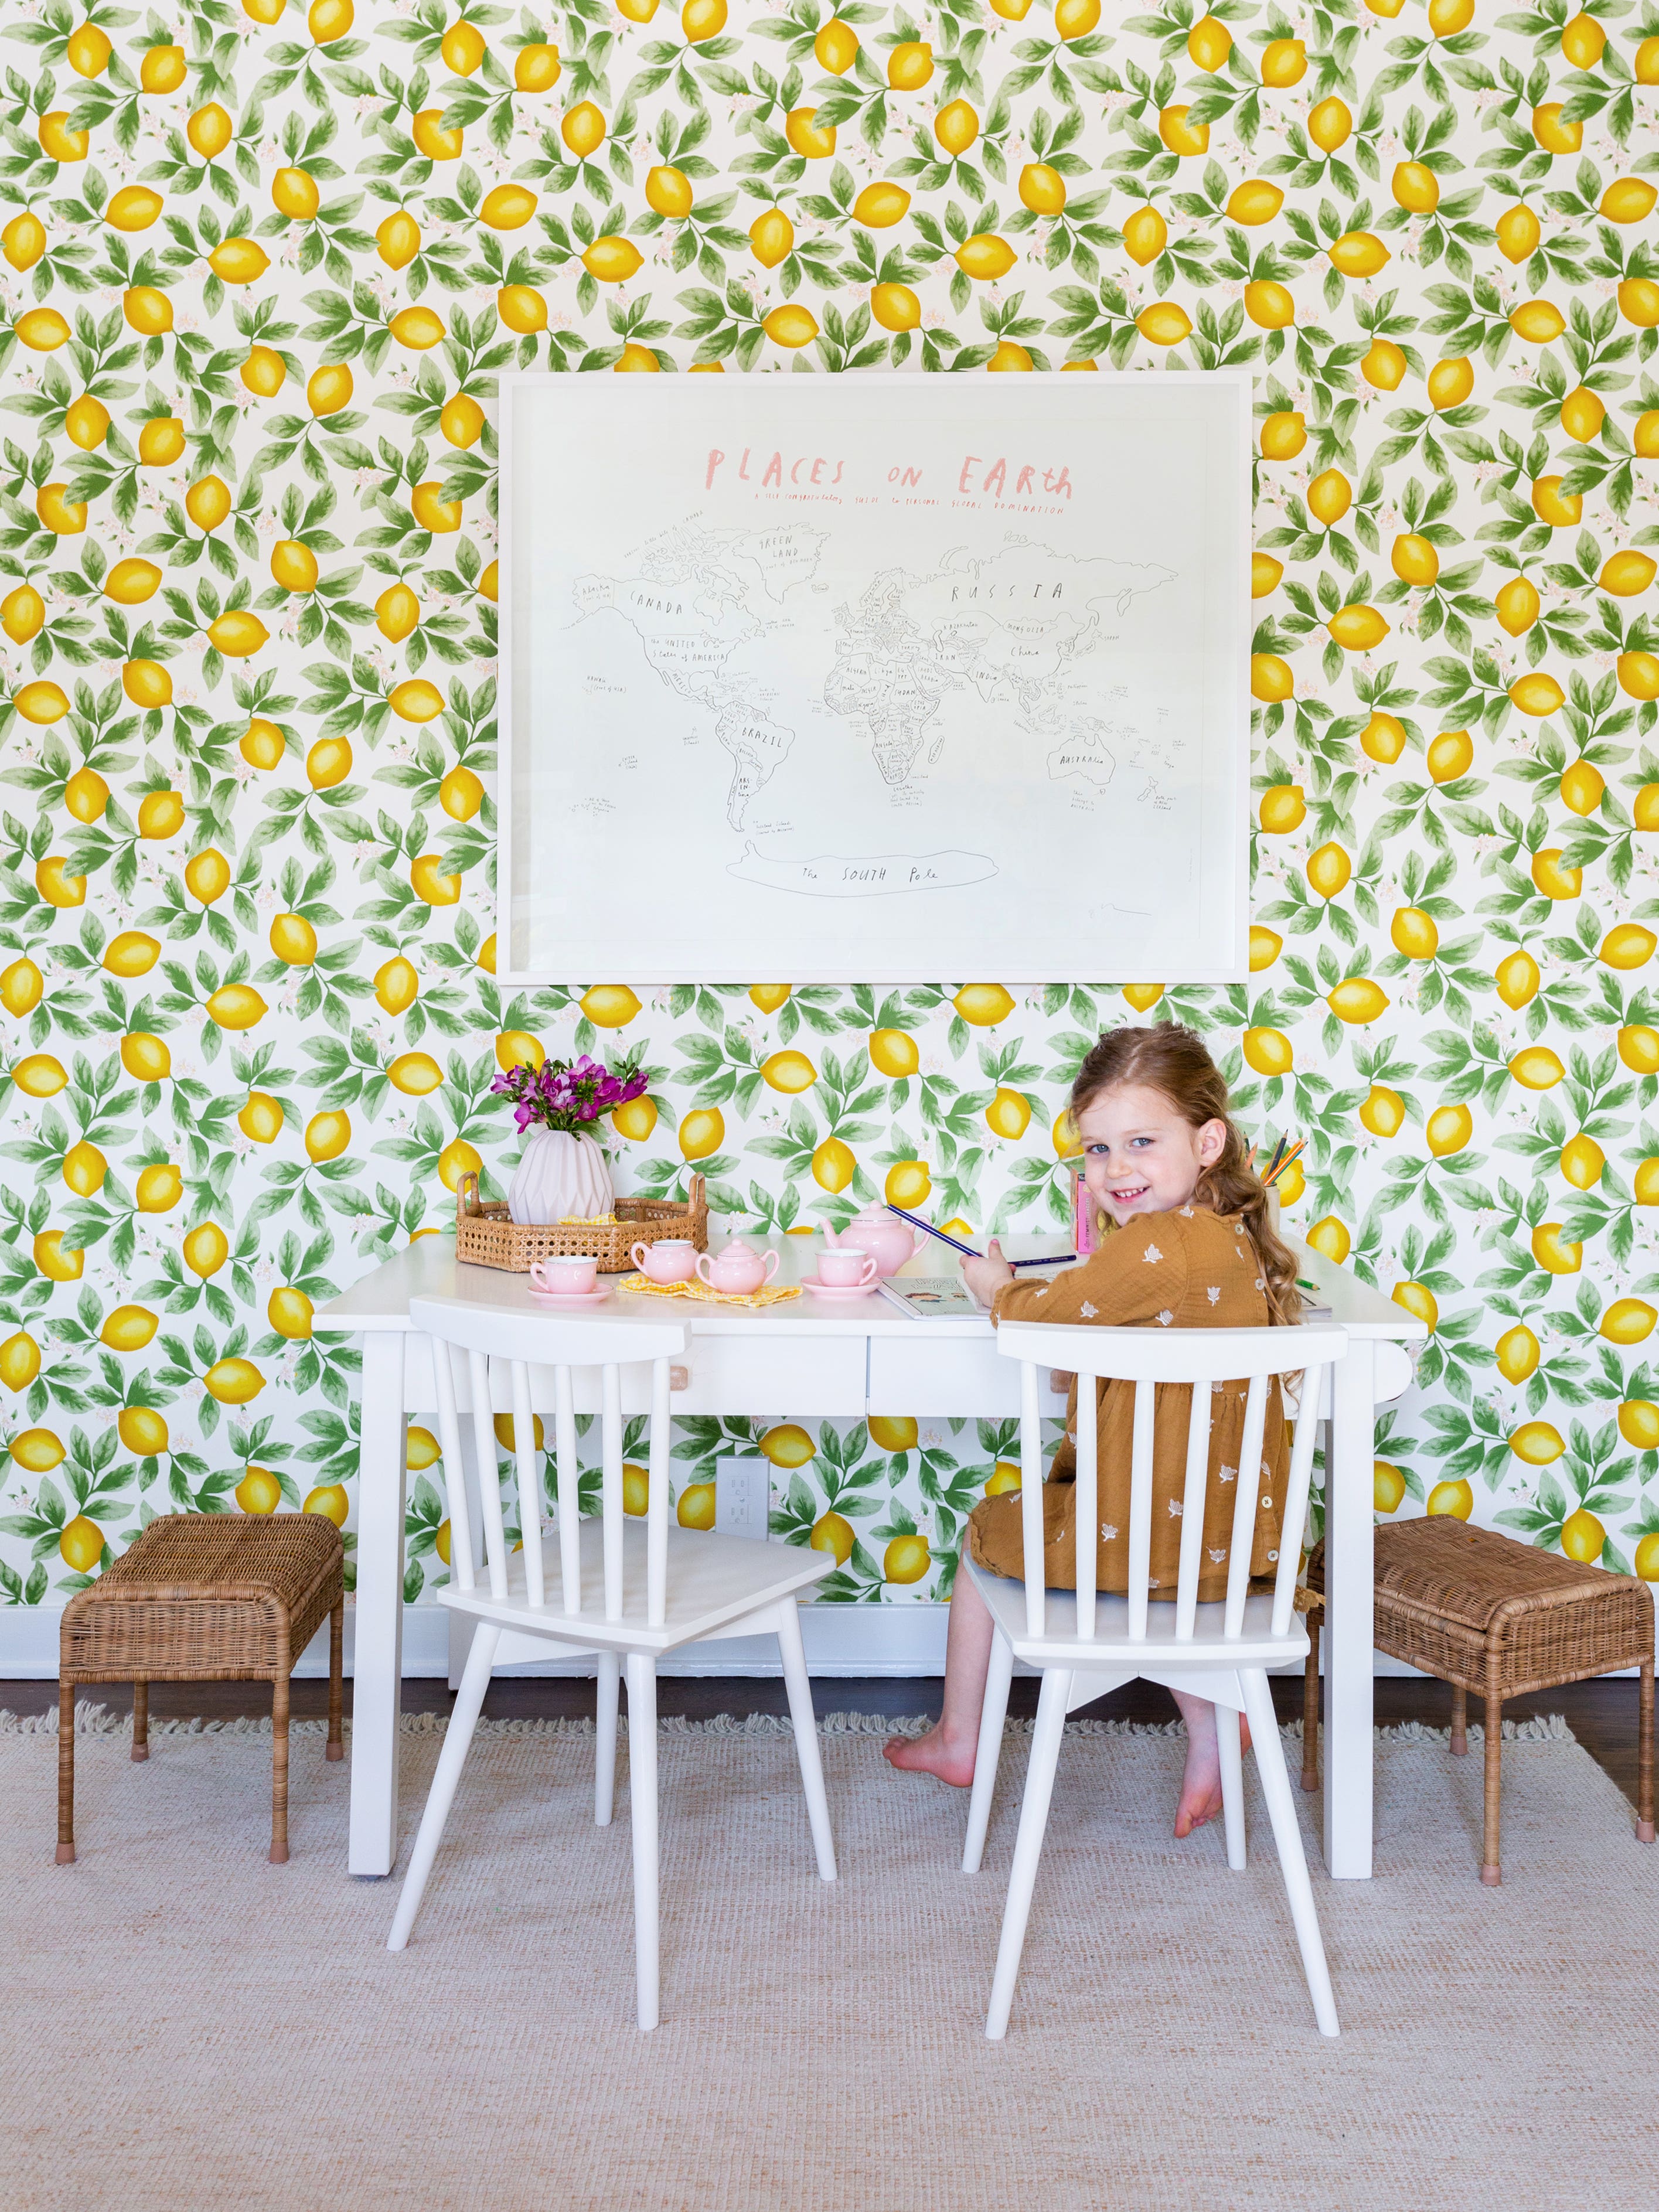 This Bright and Beautiful Bedroom Steers Clear of Kids’ Rooms Cliches